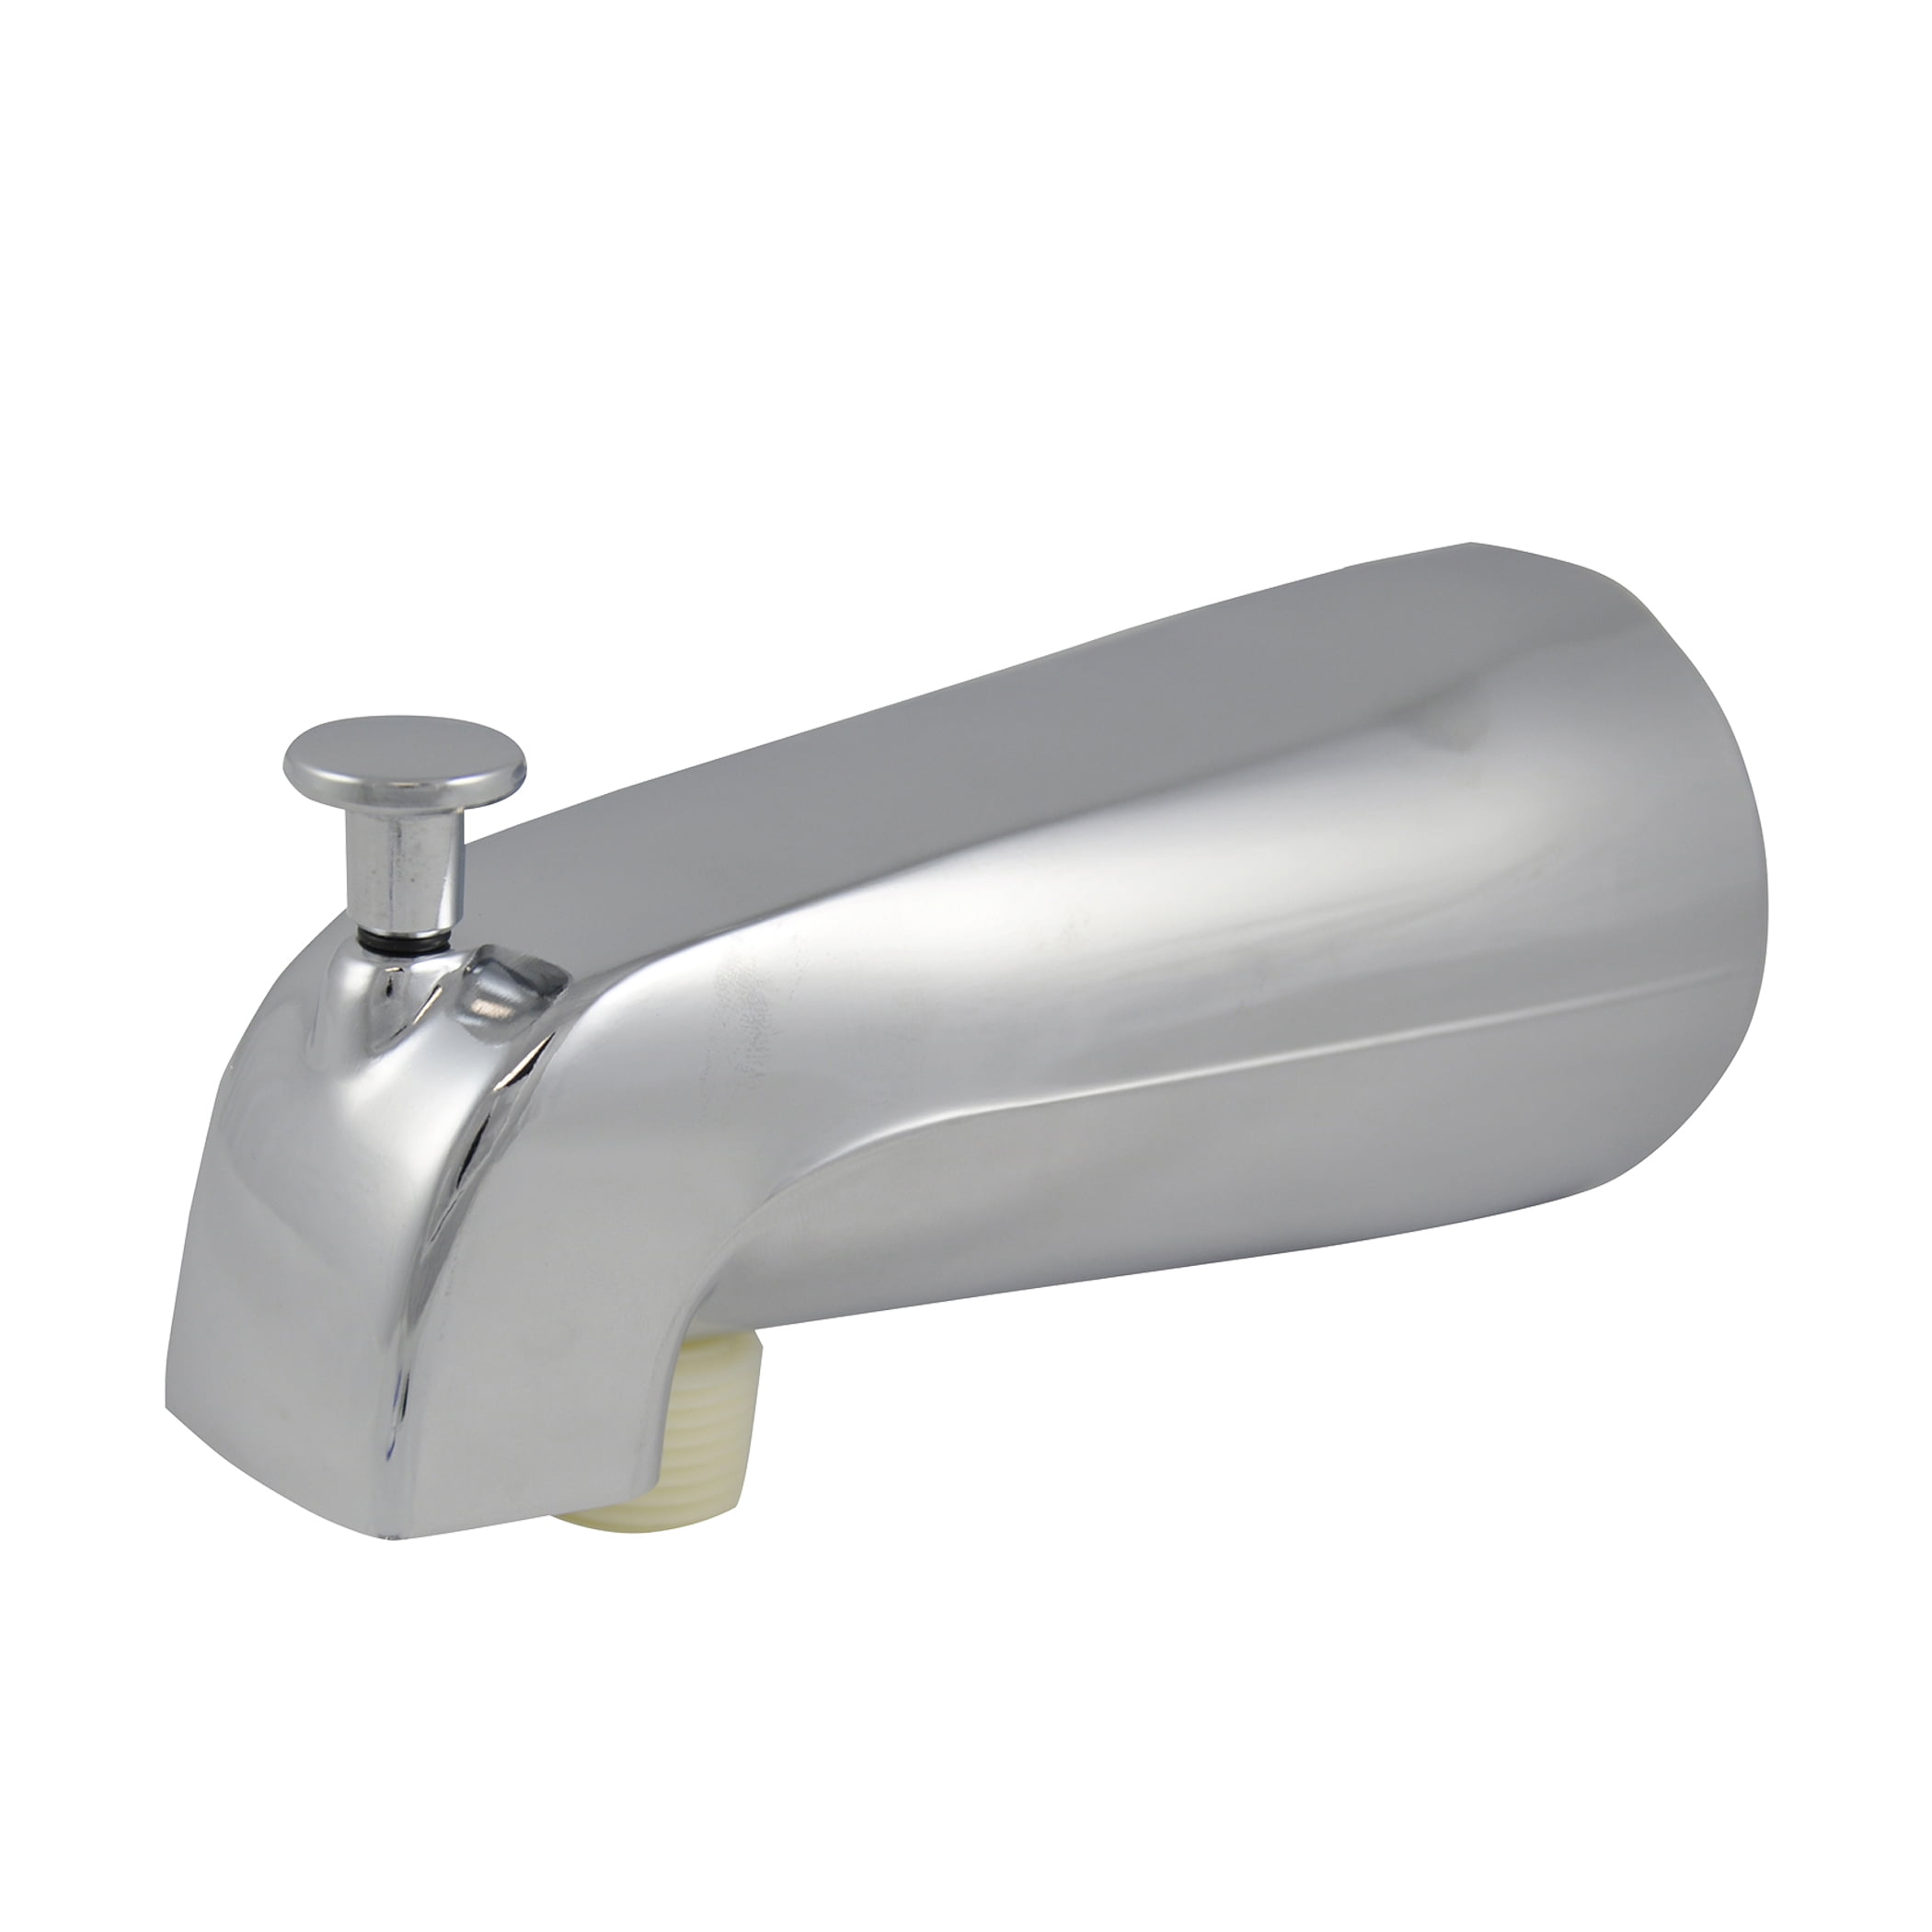 Danco Universal Tub Spout With Handheld, Shower Hook Up To Bathtub Faucet